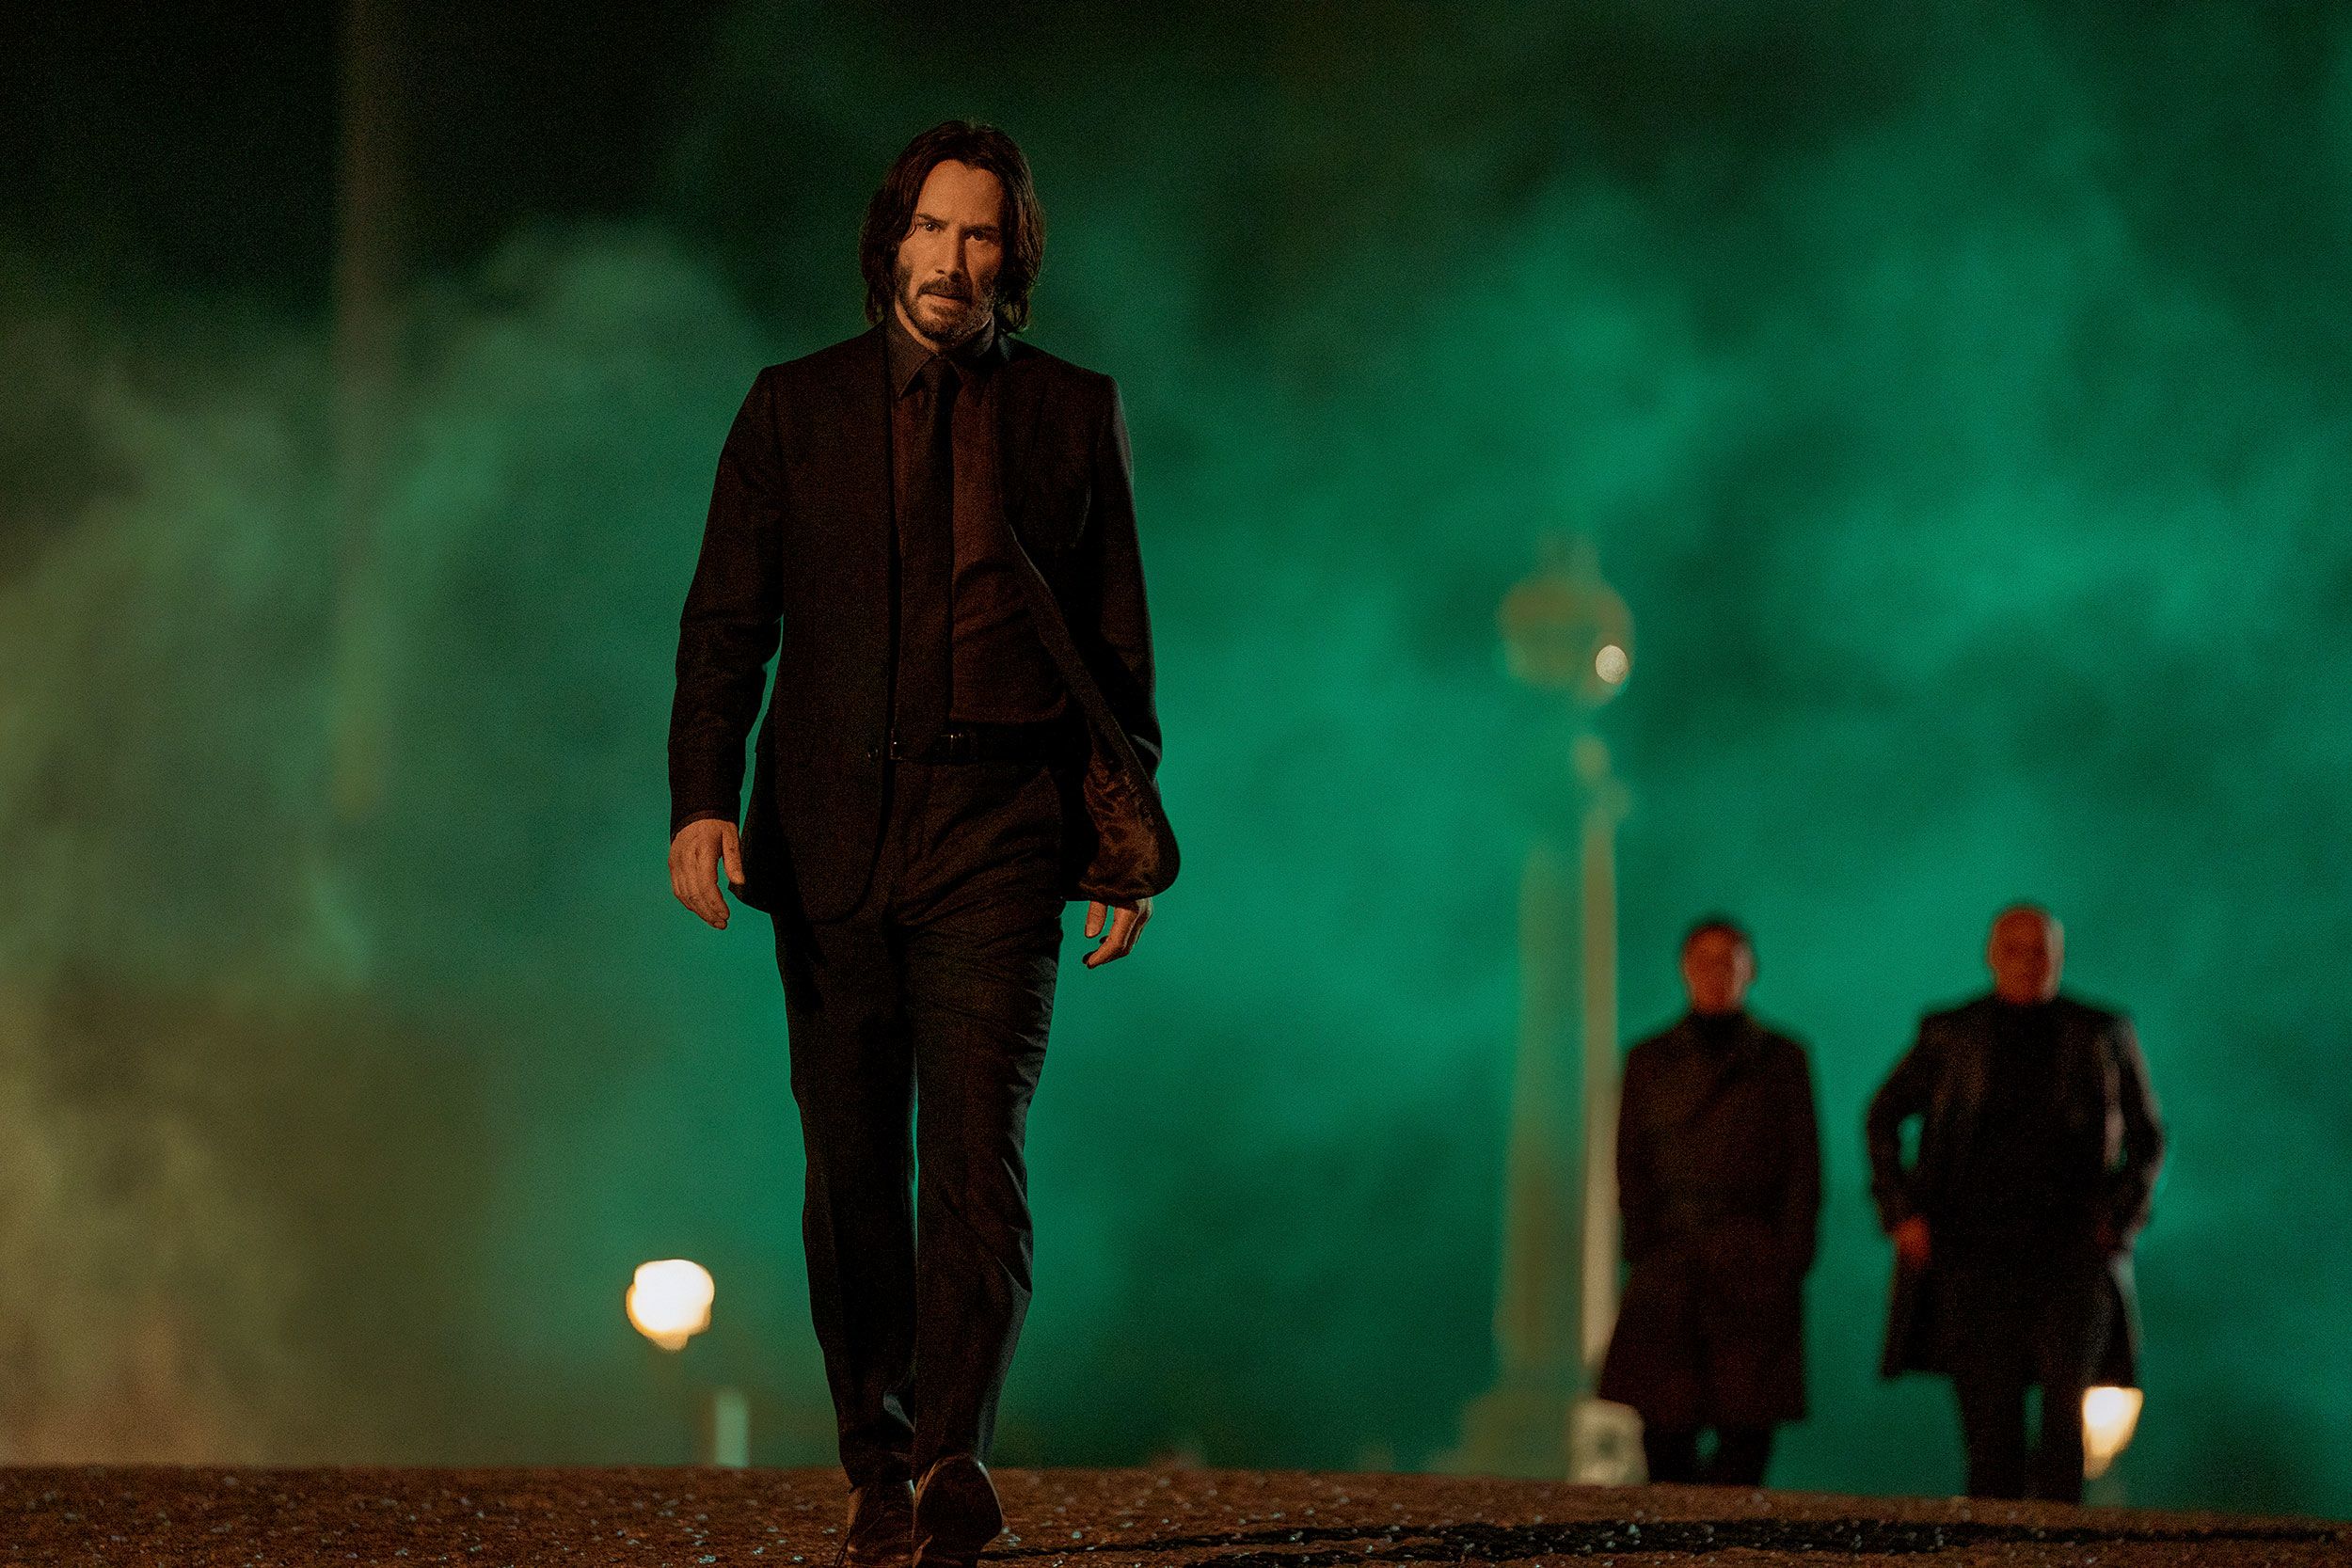 How John Wick 2 Pulled Off Its Most Expensive Scene On A Restrictive Budget